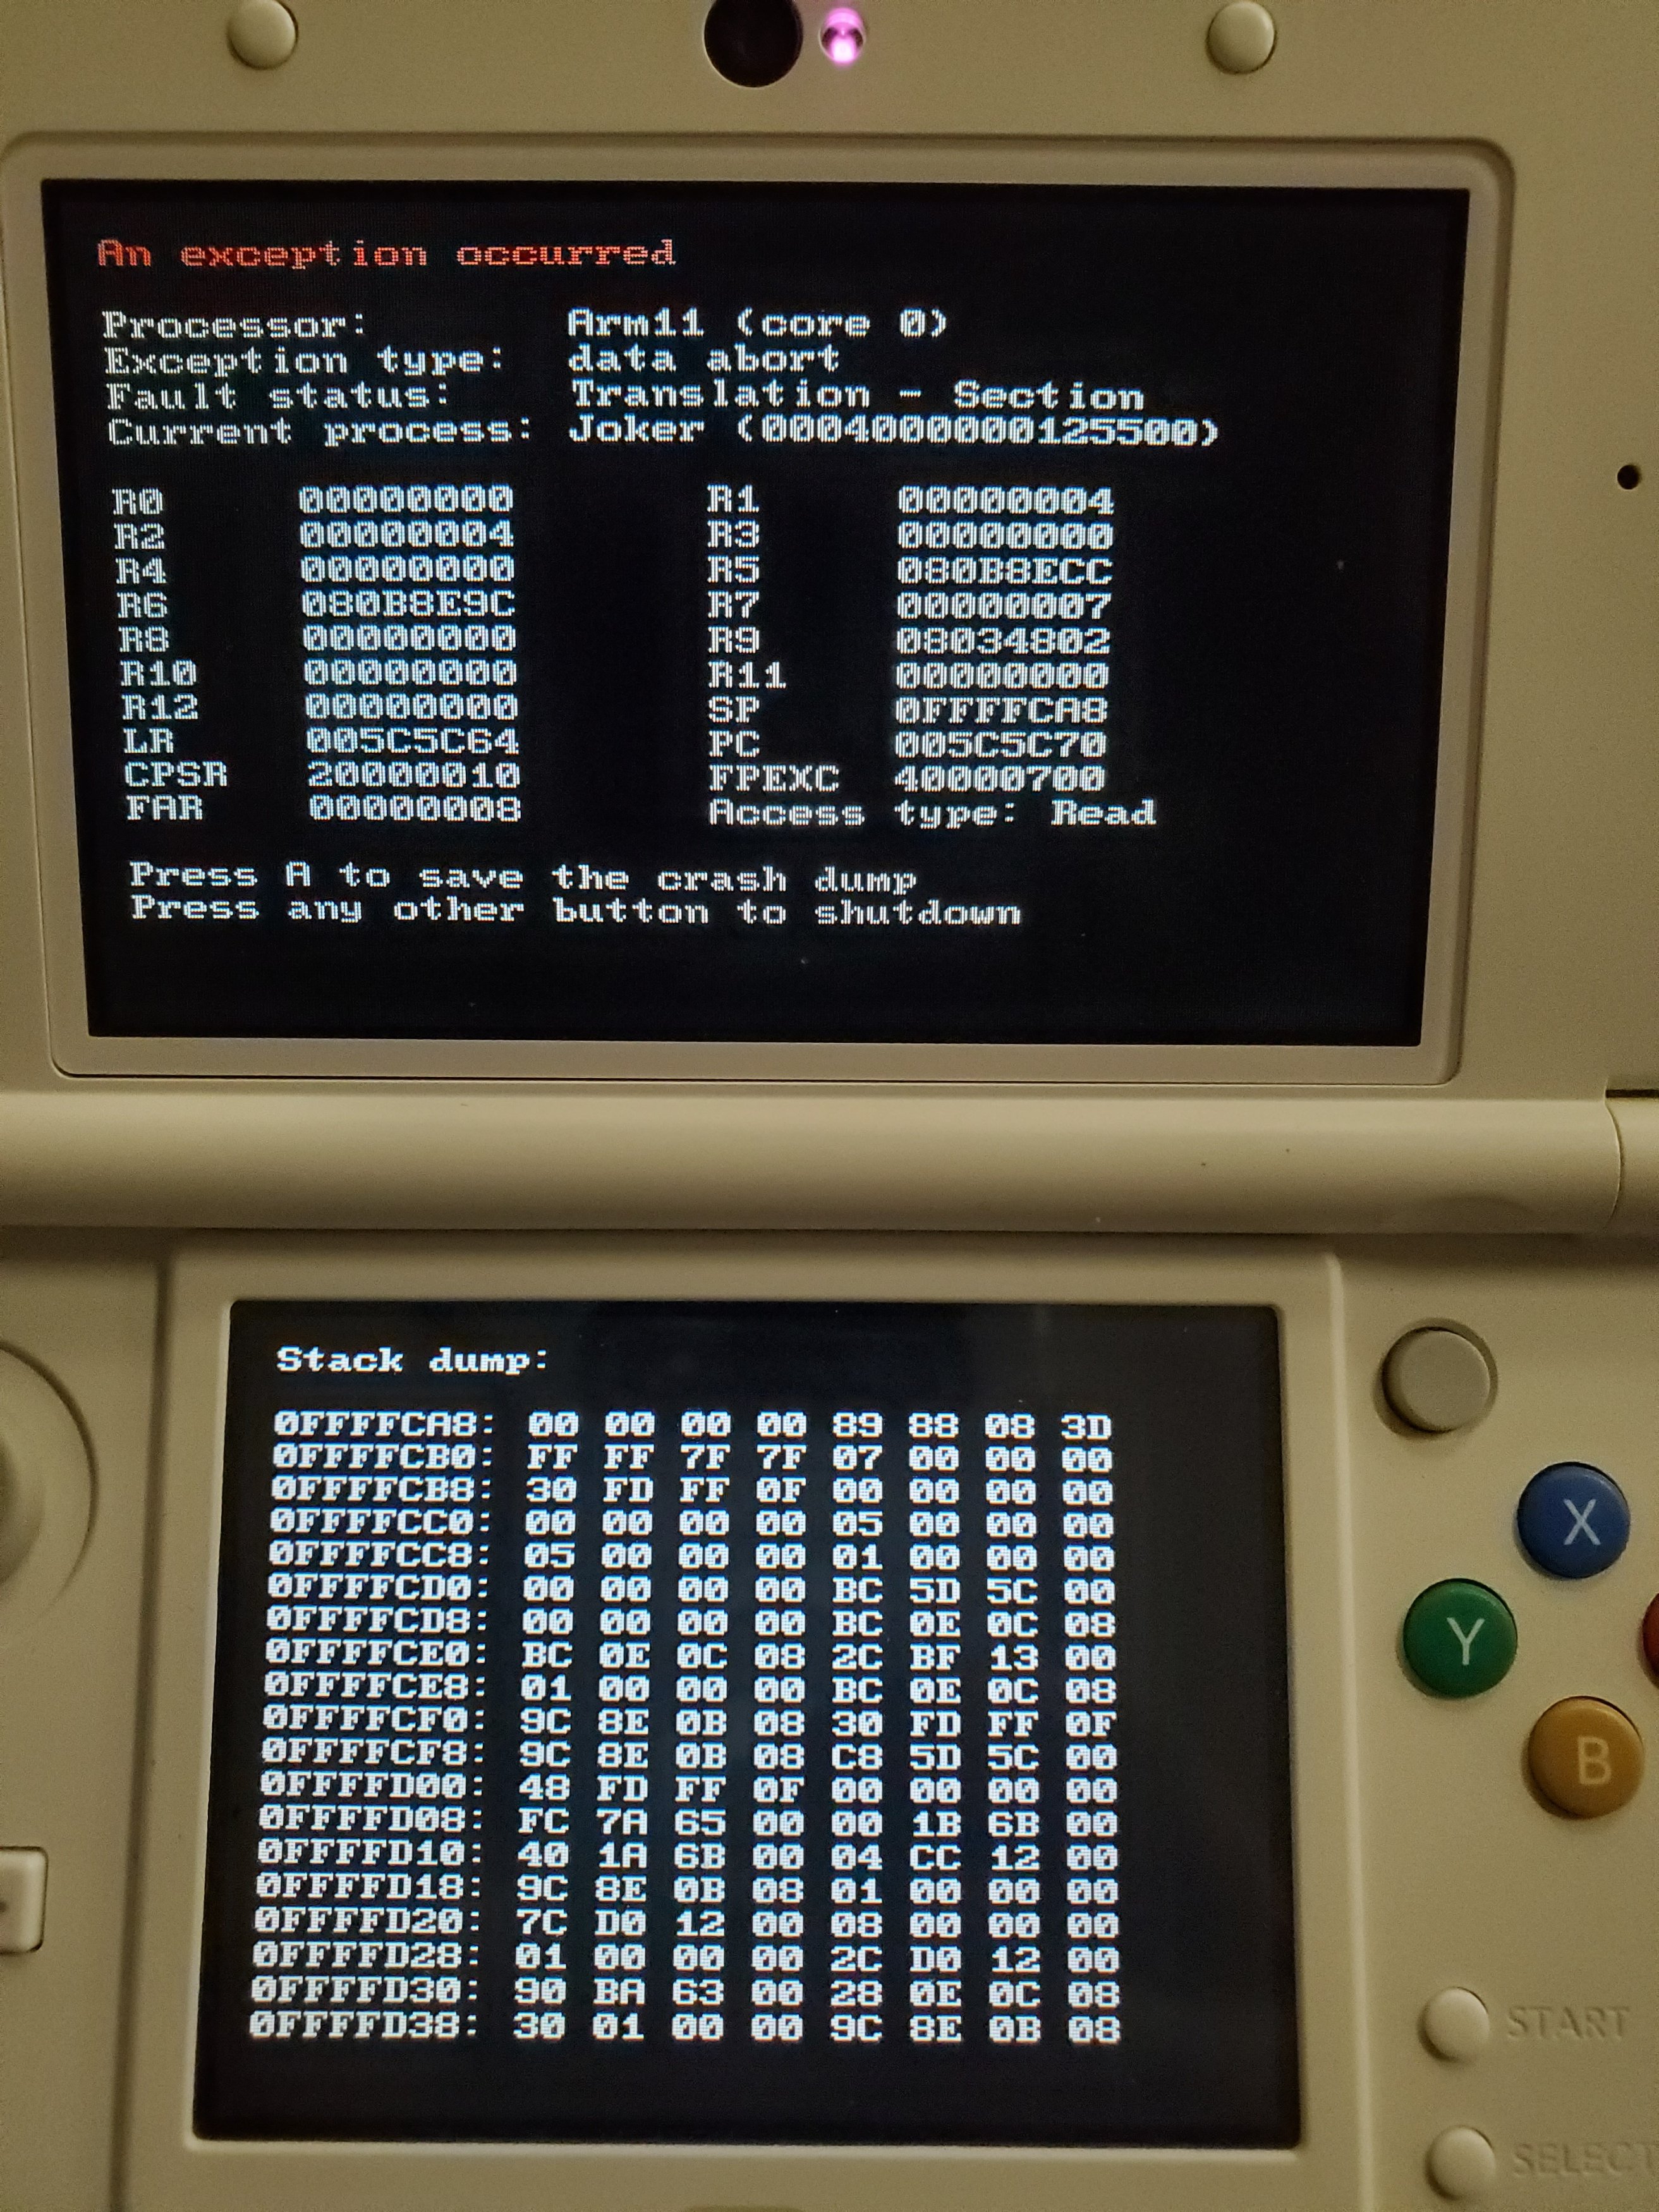 Majoras mask 3ds freezes at launch - Citra Support - Citra Community